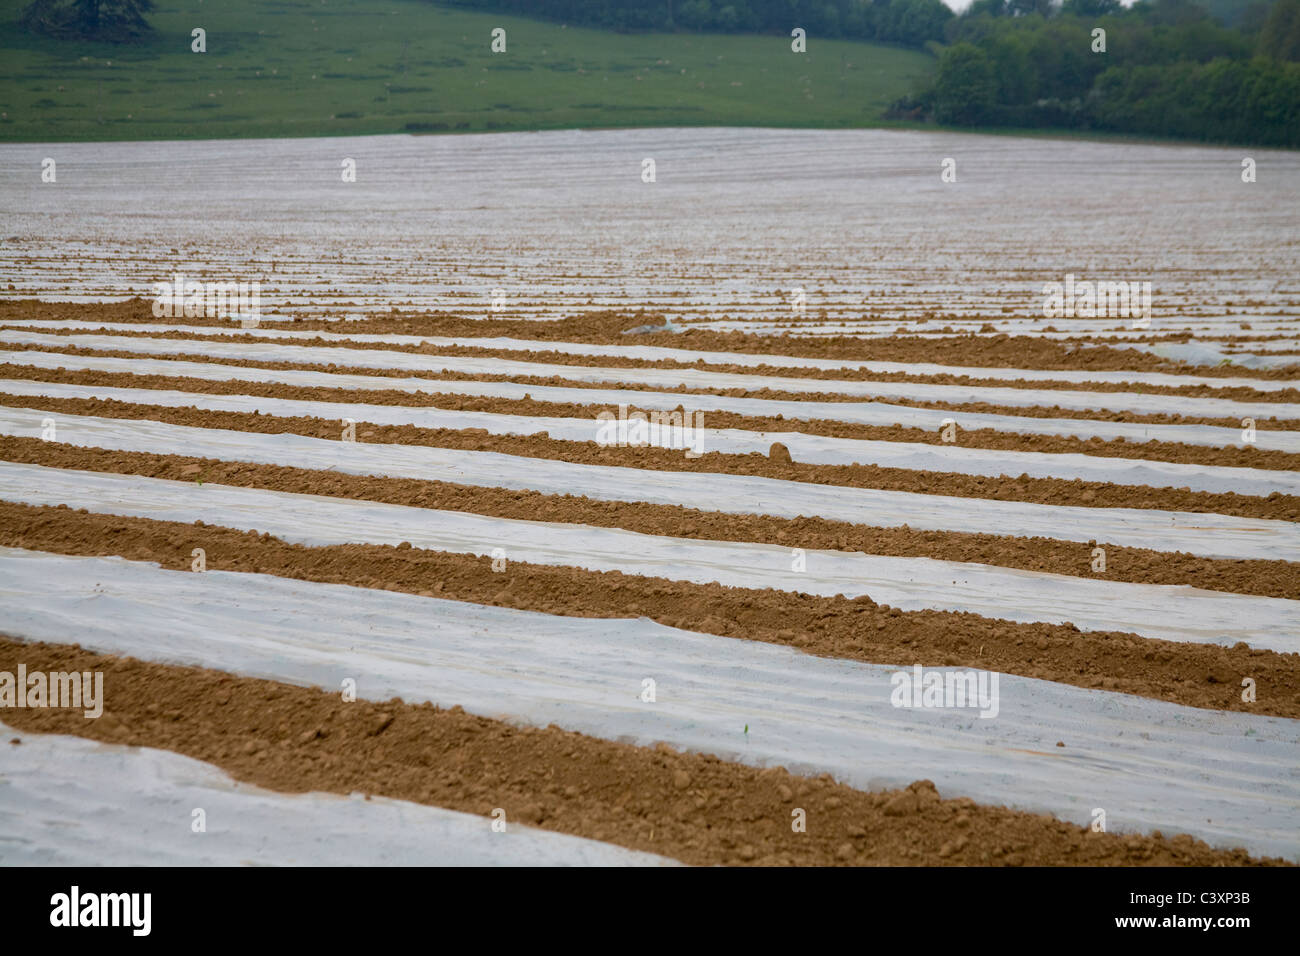 Herefordshire England UK Rows of plastic sheets covering and protecting tender sweet corn plants important local product on lovely April spring day Stock Photo